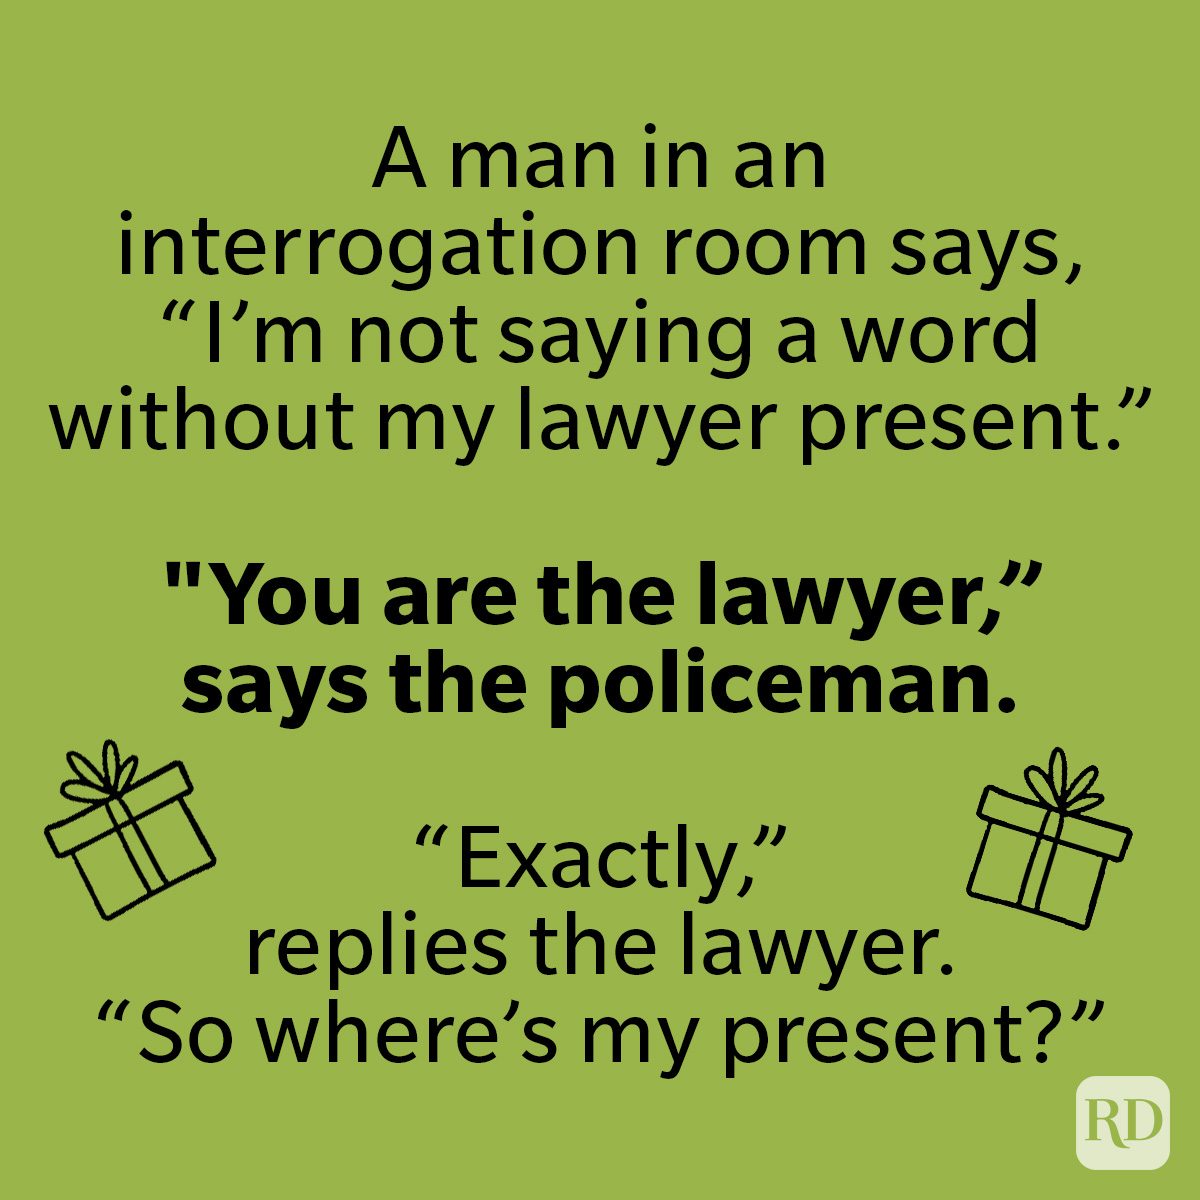 110 Lawyer Jokes Any Jury Would Agree Are Hilarious Funny Stories About Lawbreakers Graphic